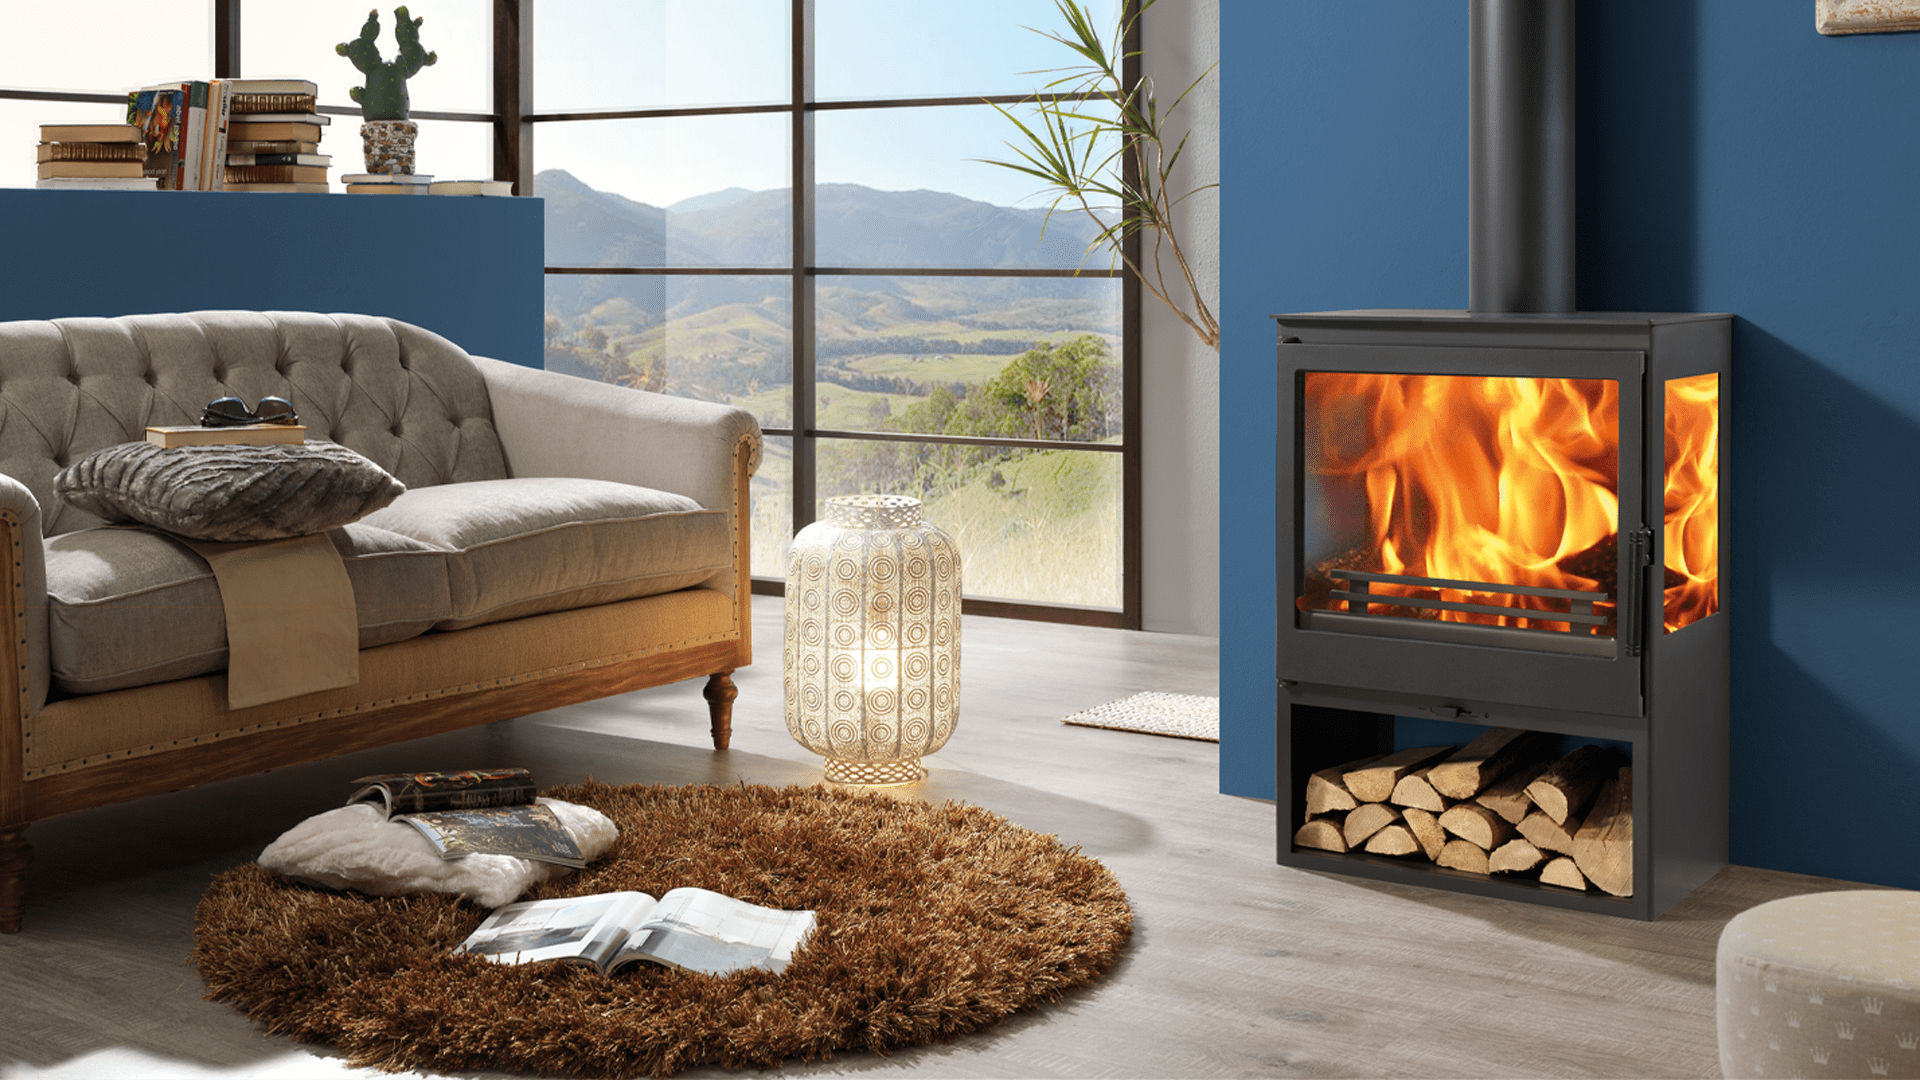 Panadero wood stove Onix model for your home in winter 